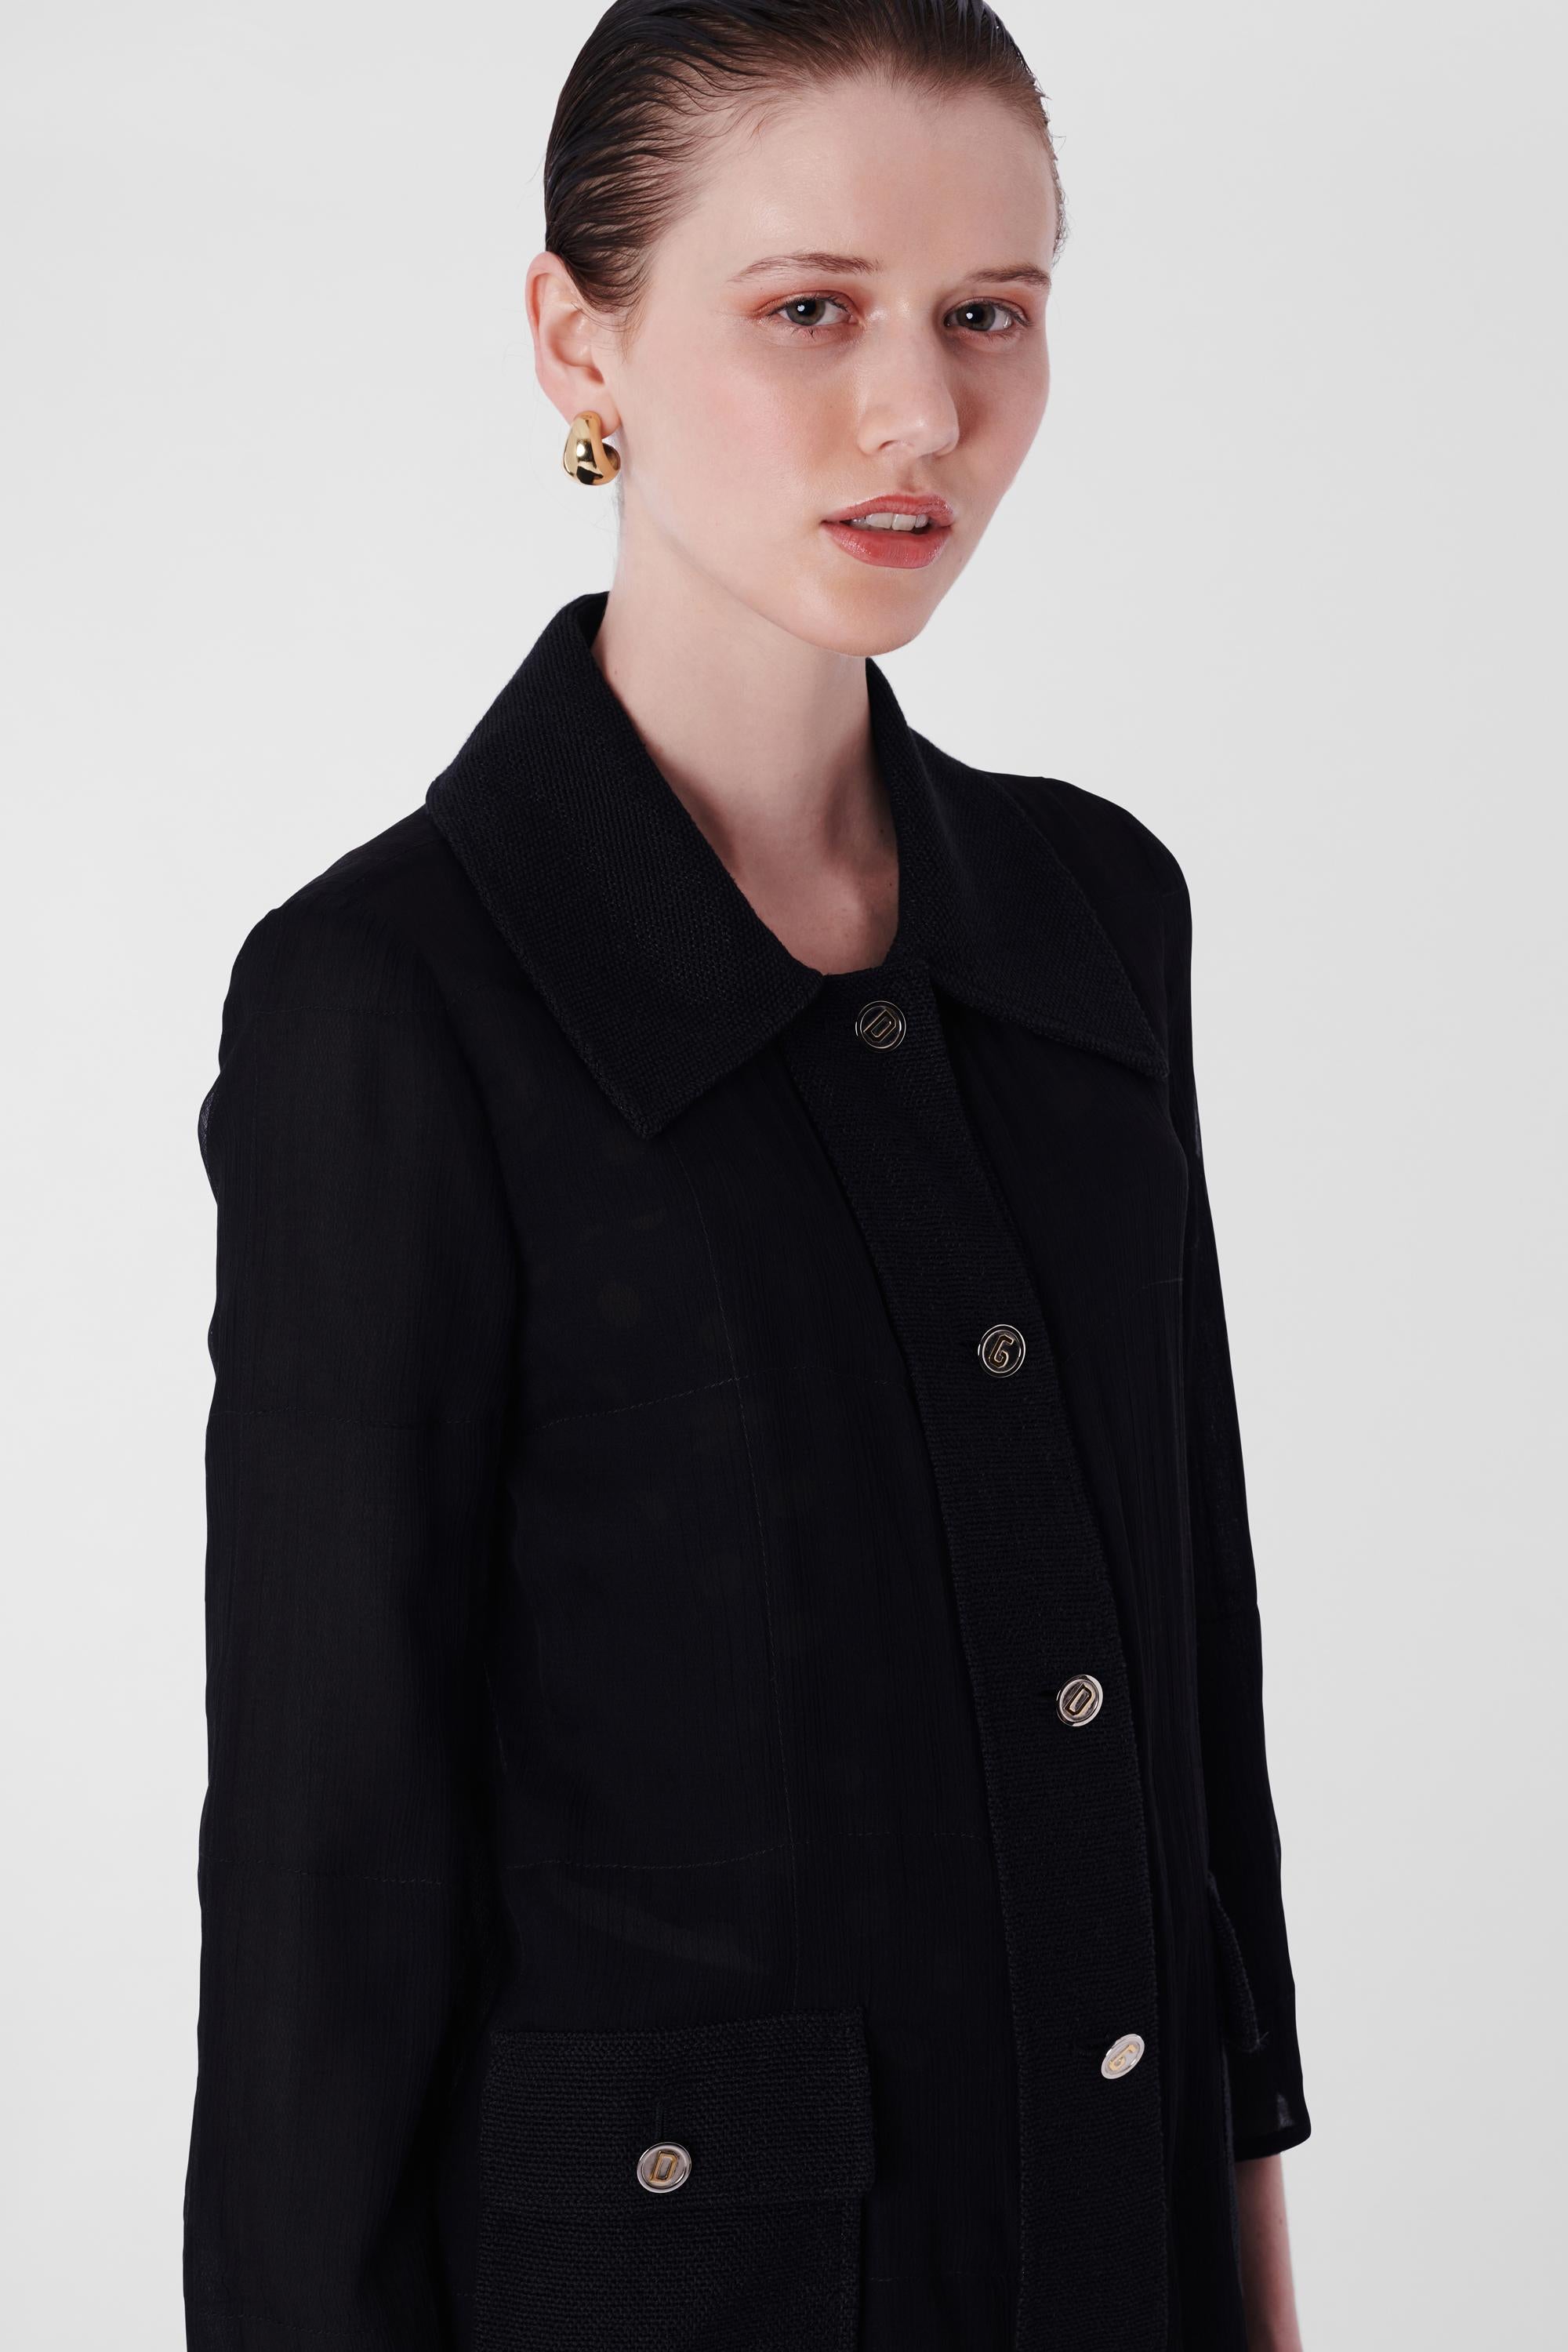 Dolce & Gabbana Vintage 2003 Black Silk Trench Coat In Excellent Condition For Sale In London, GB